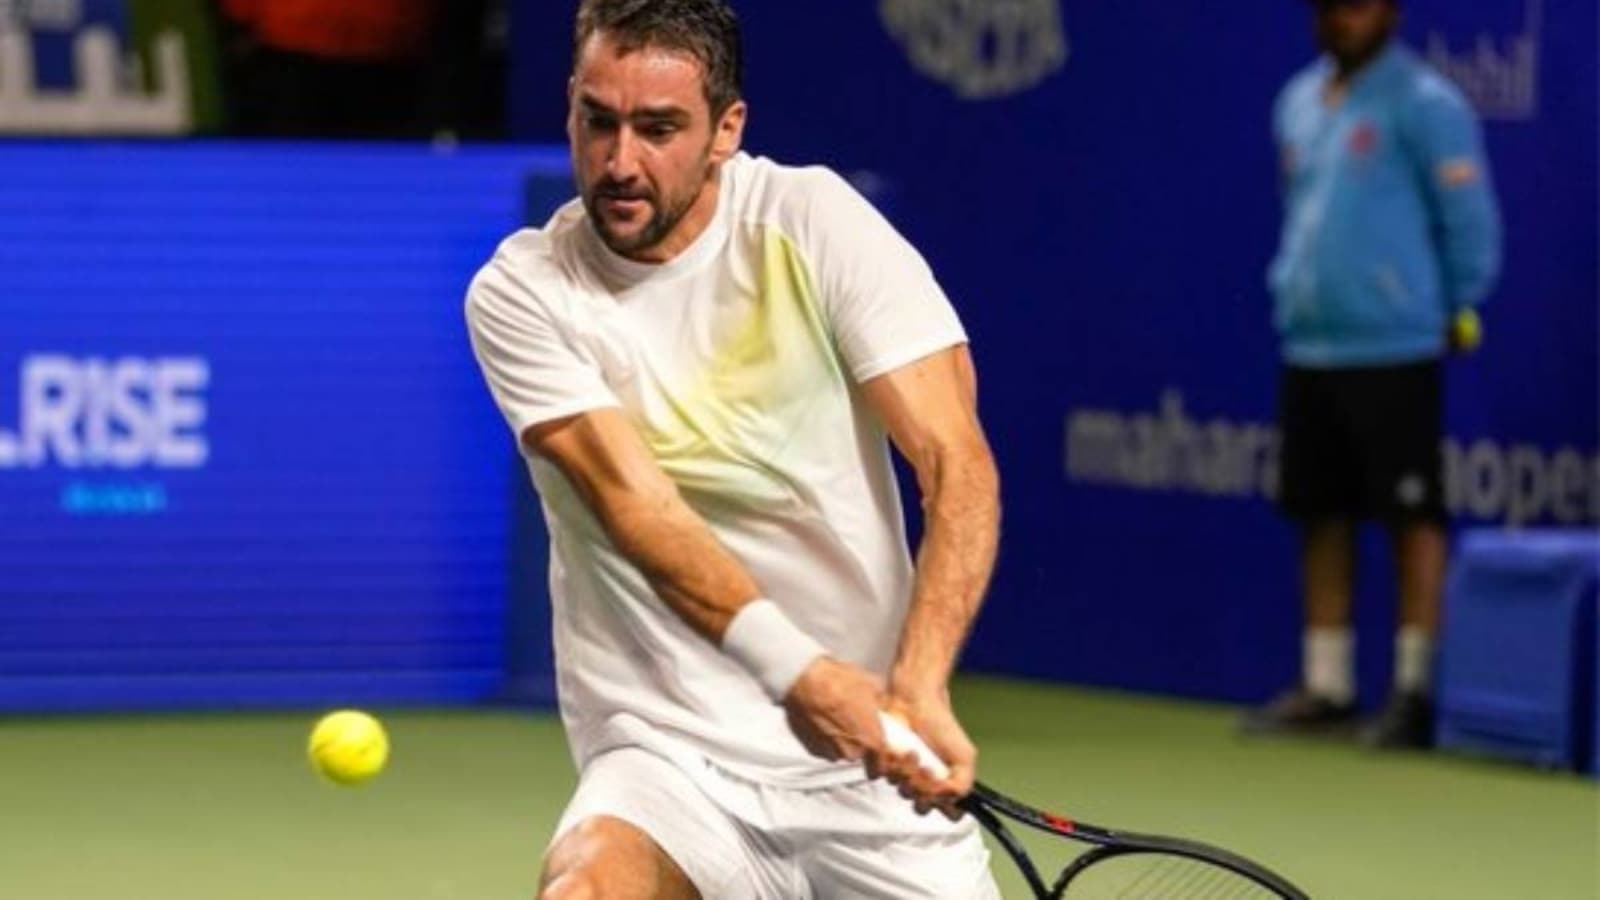 Top seed Marin Cilic pulls out of Tata Open Maharashtra due to knee injury Tennis News